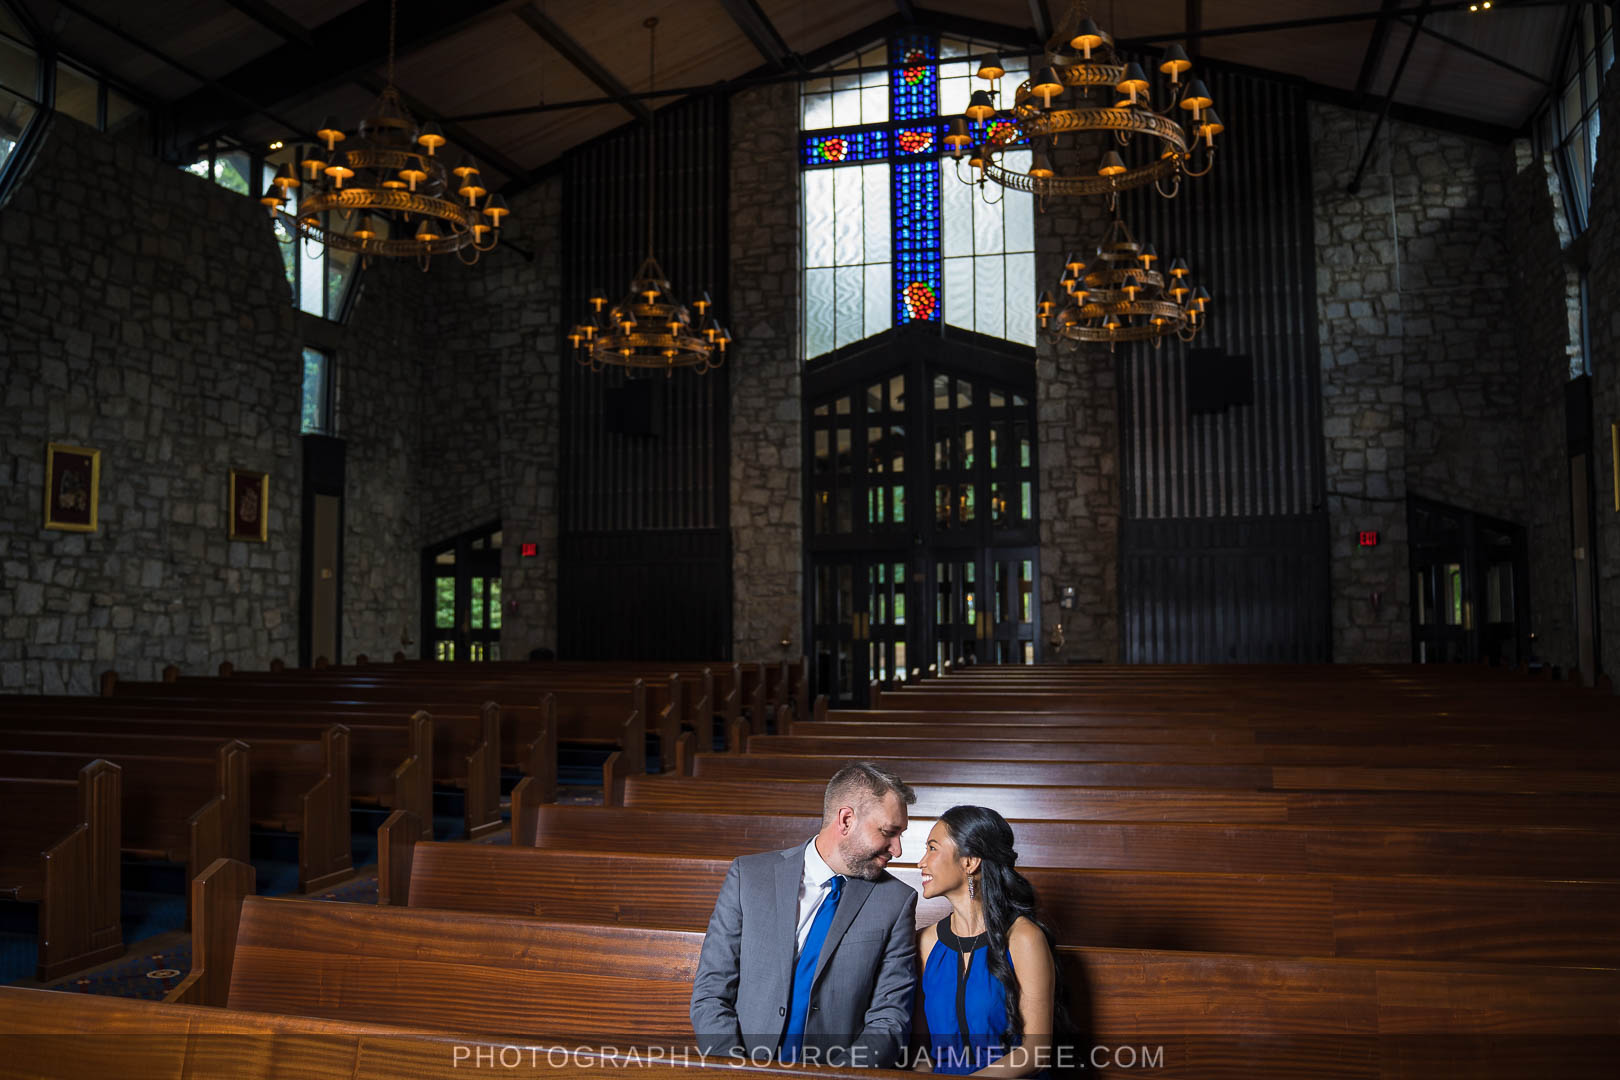 Summer Engagement Photos in a church - indoor location idea